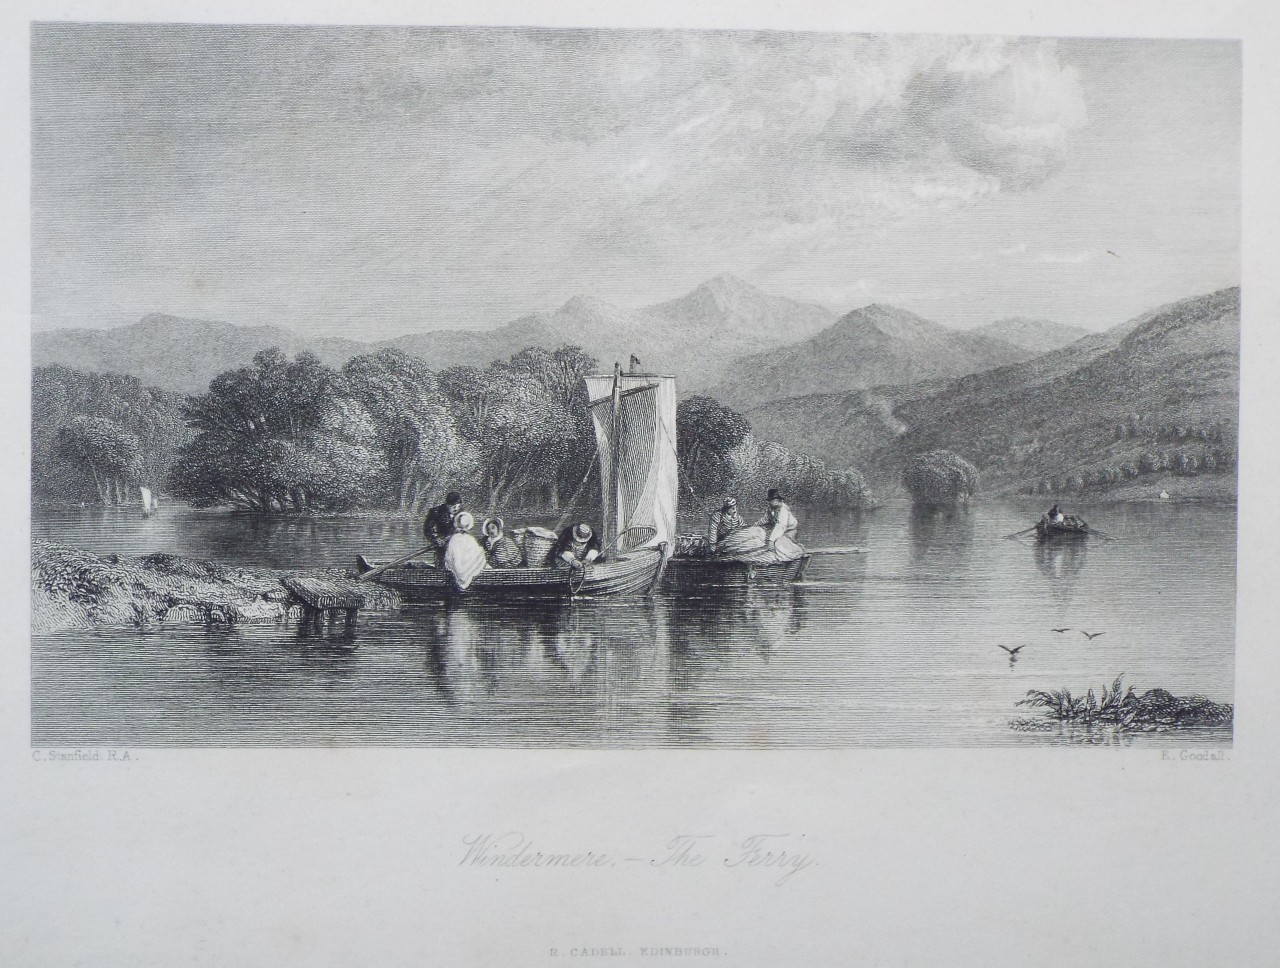 Print - Windermere, - The Ferry. - Goodall